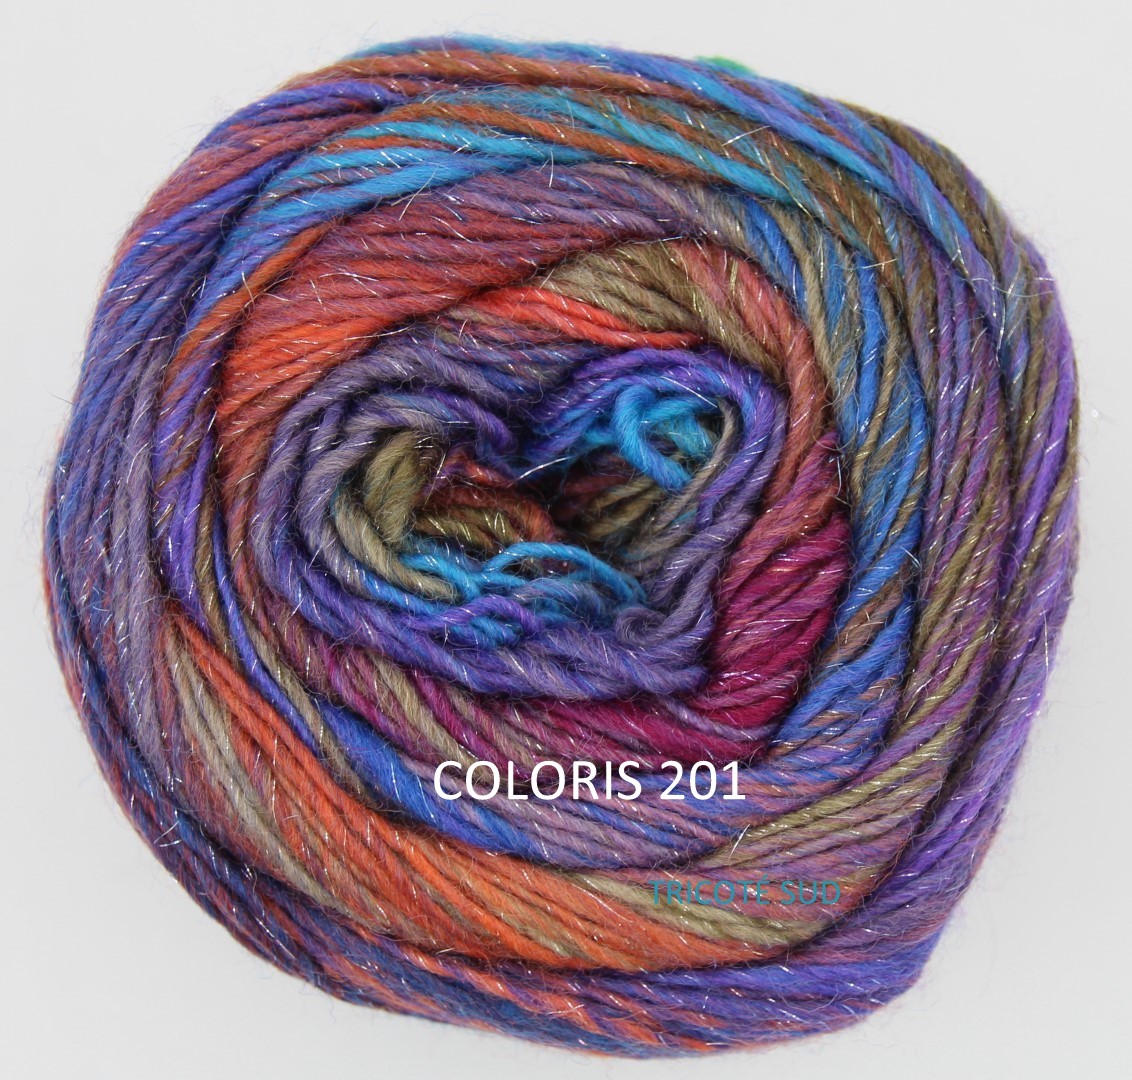 MILLE COLORI SOCKS AND LACE LUXE LANG YARNS COLORIS 201 (2) (Large)